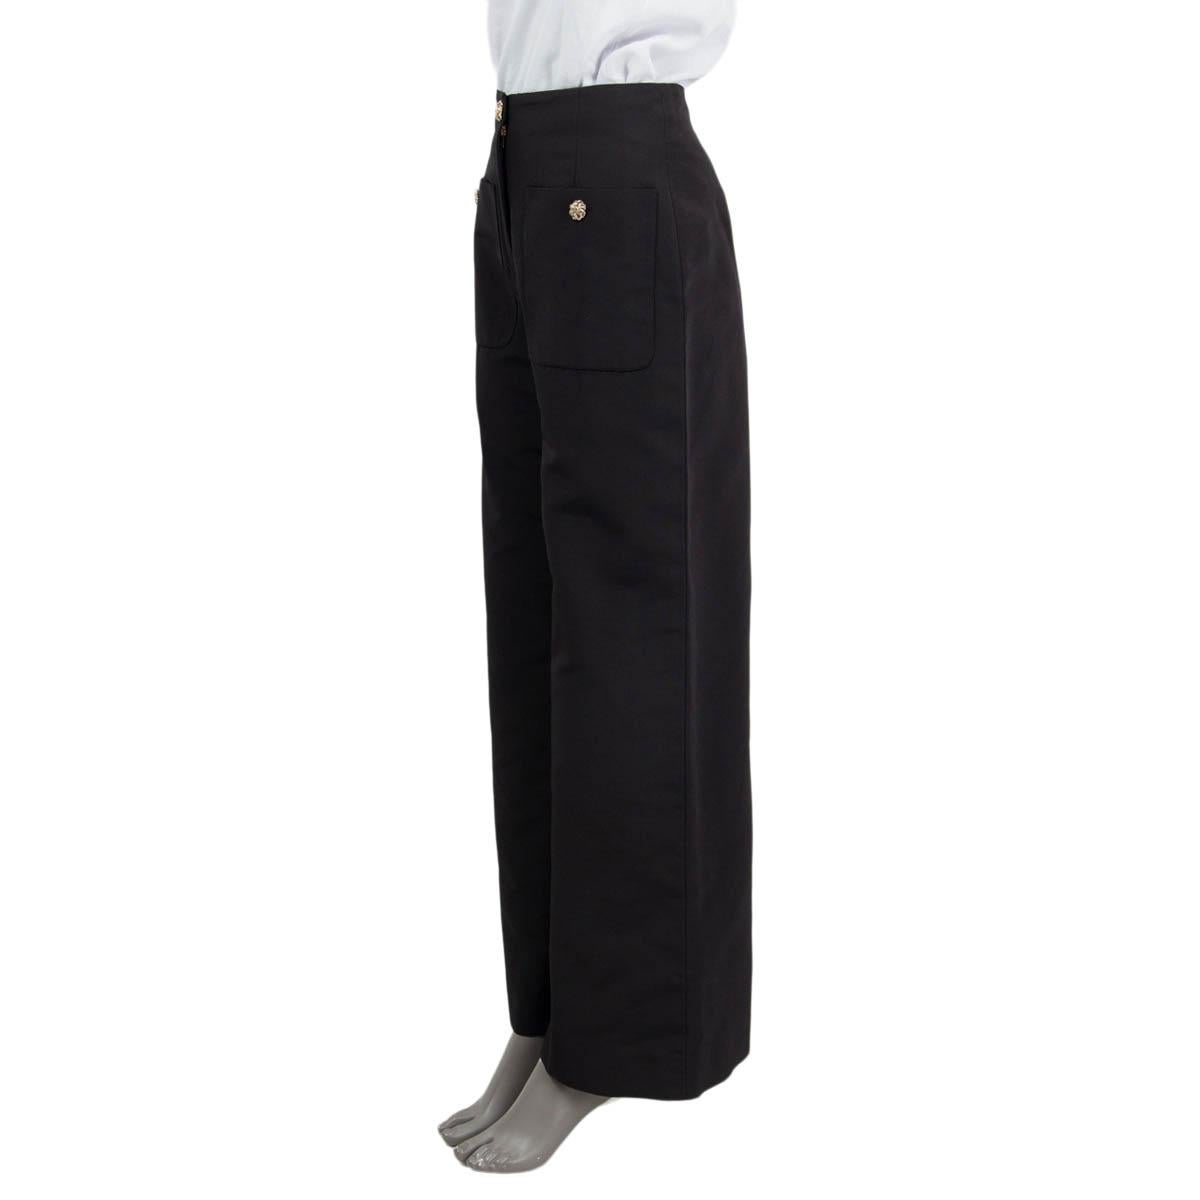 100% authentic Chanel 2020 Rue Cambon Metiers d'Art wide leg pants in black cotton (56%) and silk (44%). Feature two 'CC' buttoned patch pockets on the front. Open with a 'CC' and a zipper on the front. Unlined. Have been worn once and are in